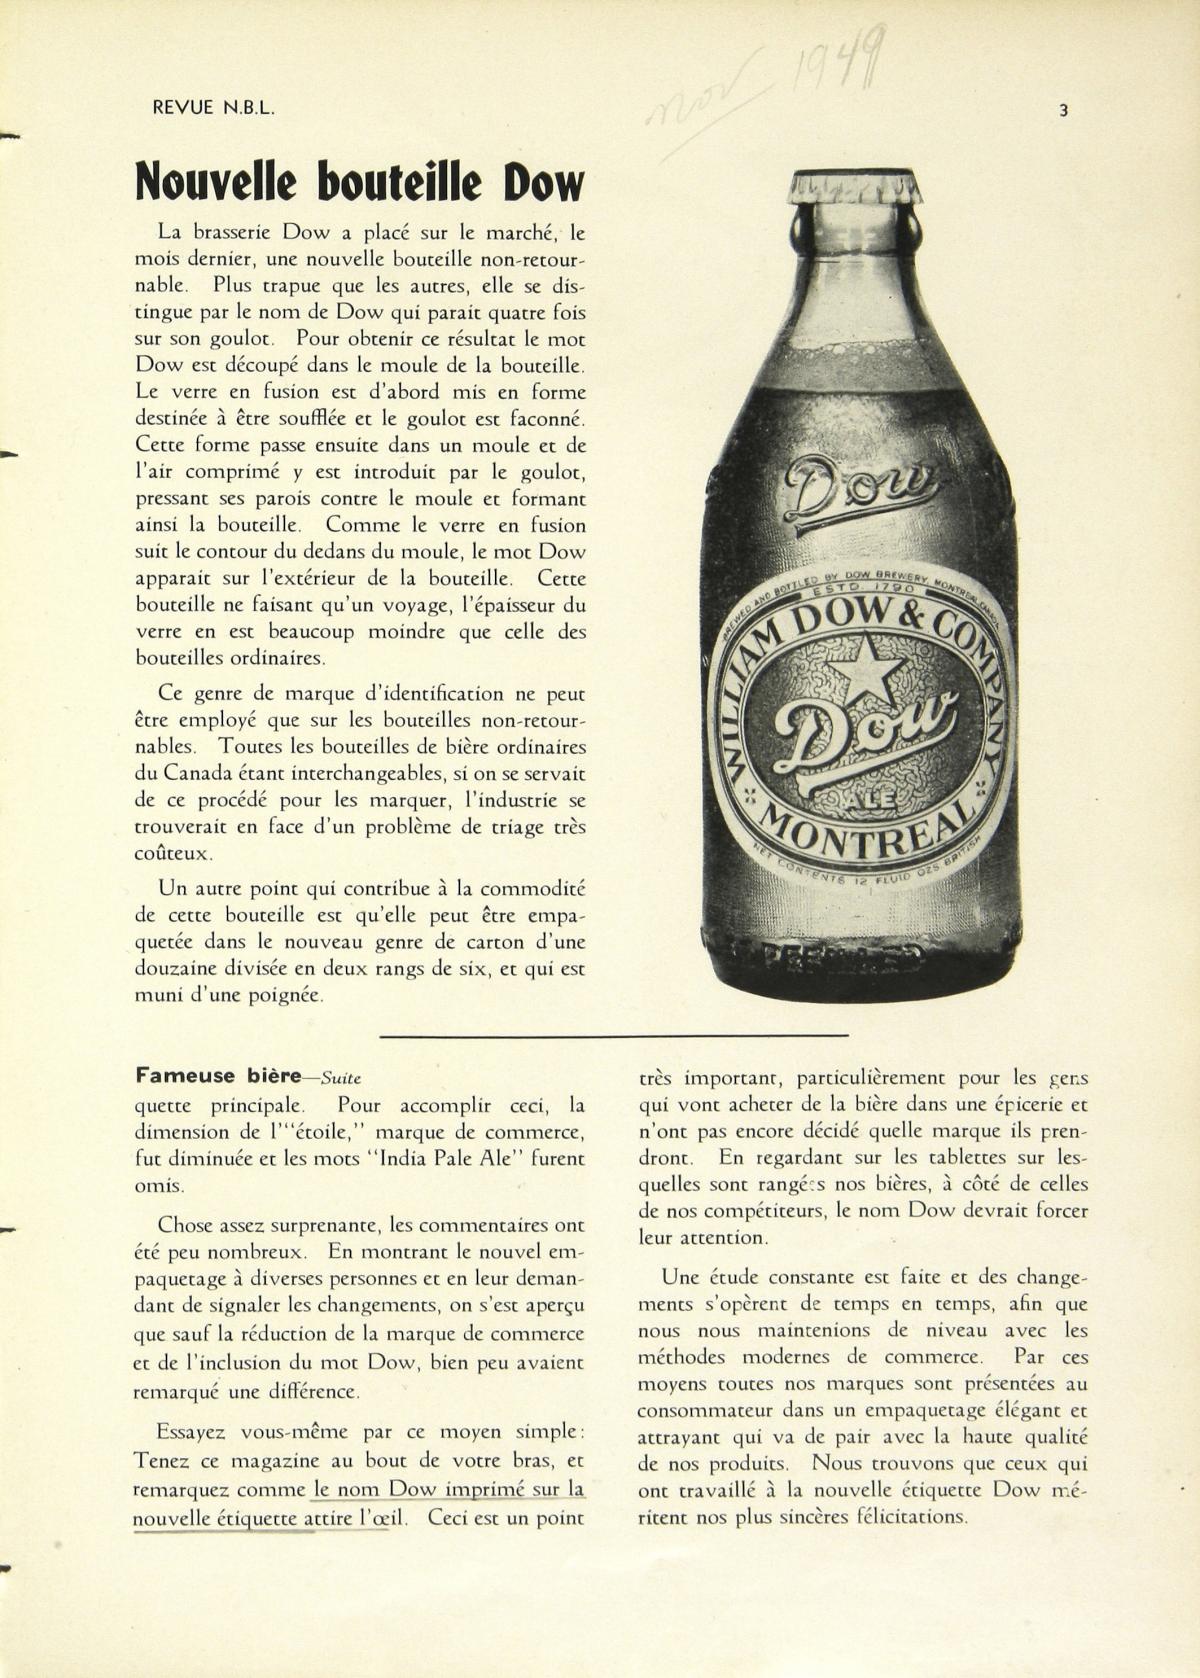 Beer Company Canada Dow Brewery Ltd 1952 to 1966 Quebec City Province of Quebec